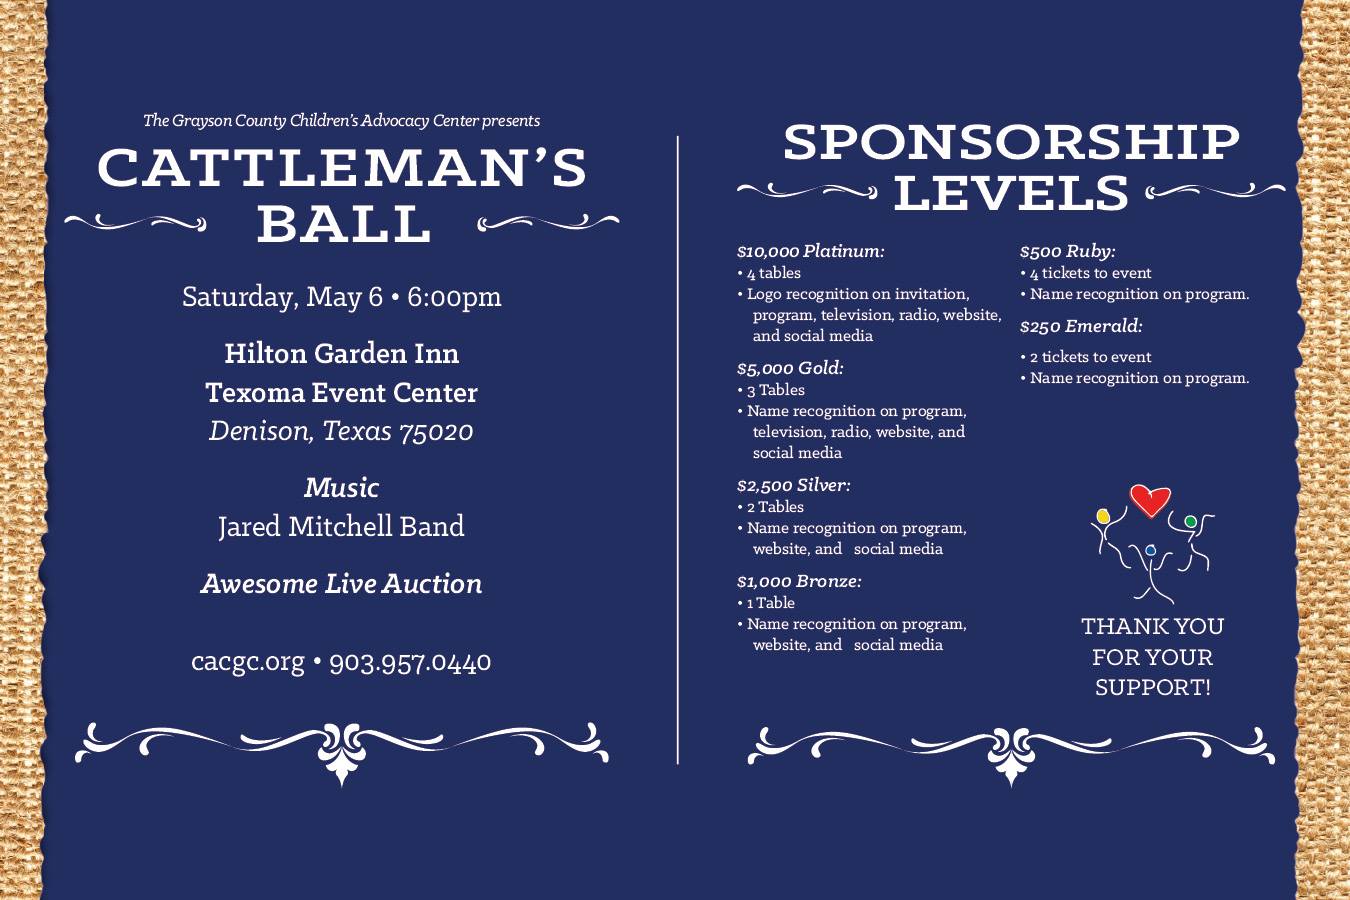 CattlemansBall - The Children's Advocacy Center Of Grayson County - Gold Star Finance Of Texas